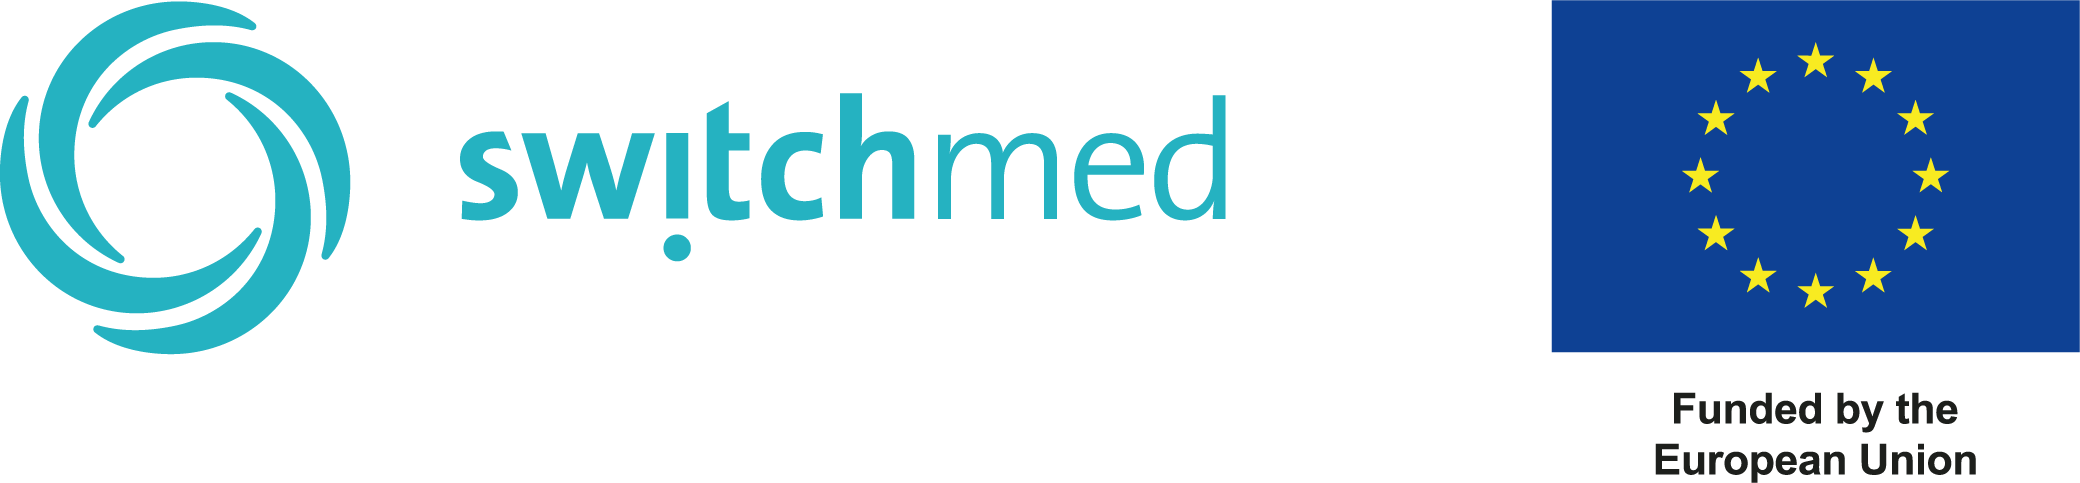 Switchmed Blue Economy Morocco